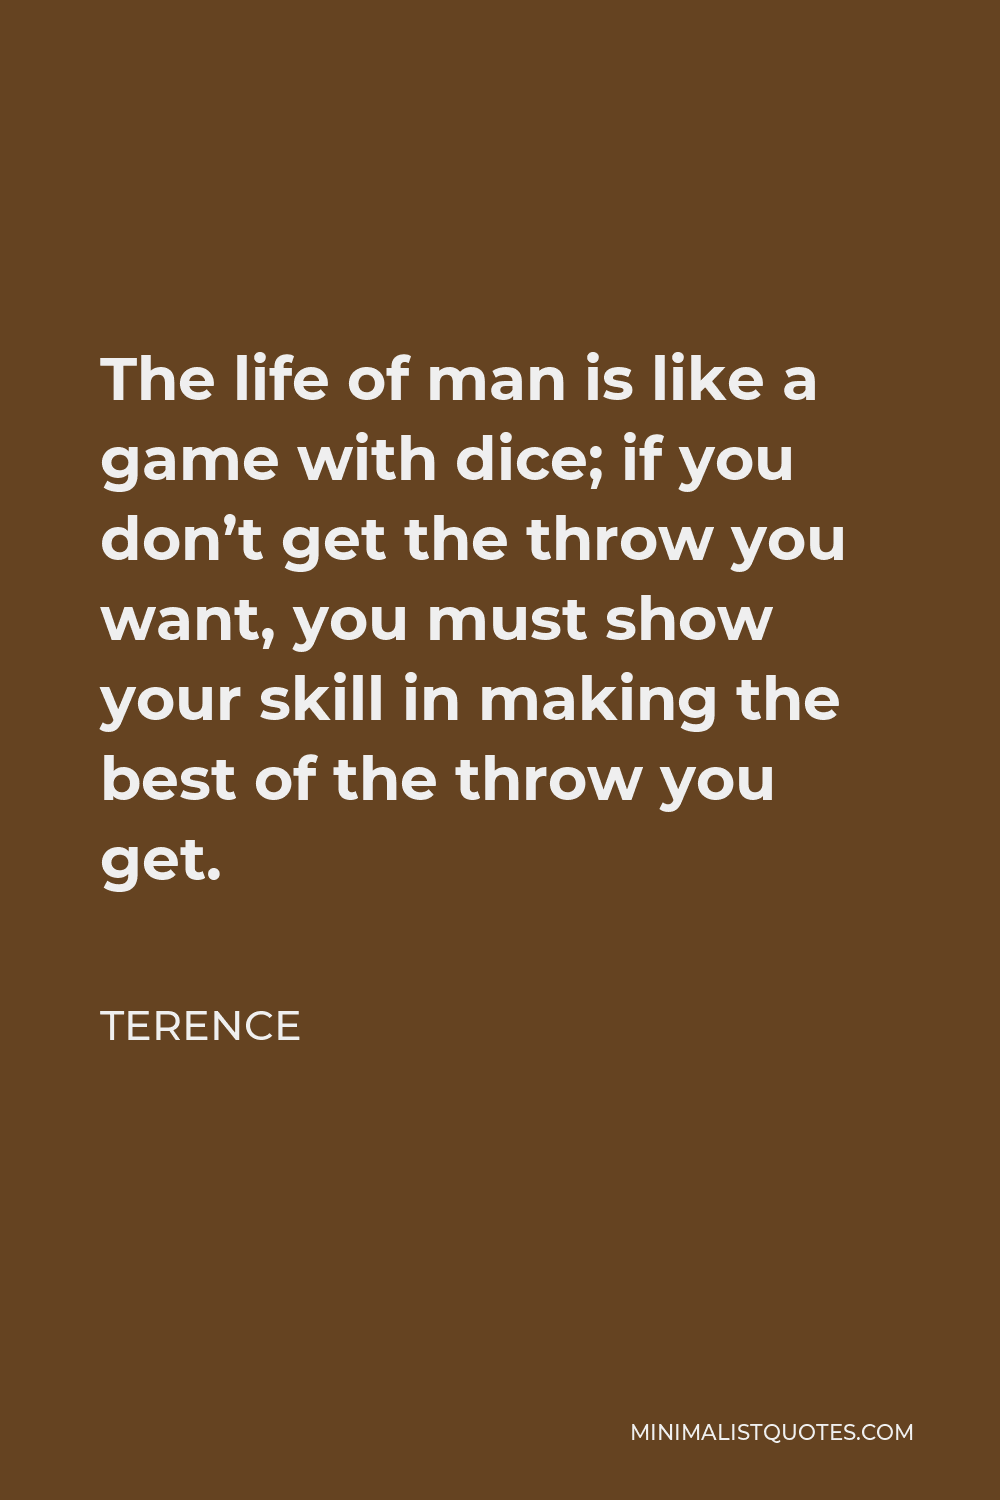 Terence Quote - The life of man is like a game with dice; if you don’t get the throw you want, you must show your skill in making the best of the throw you get.